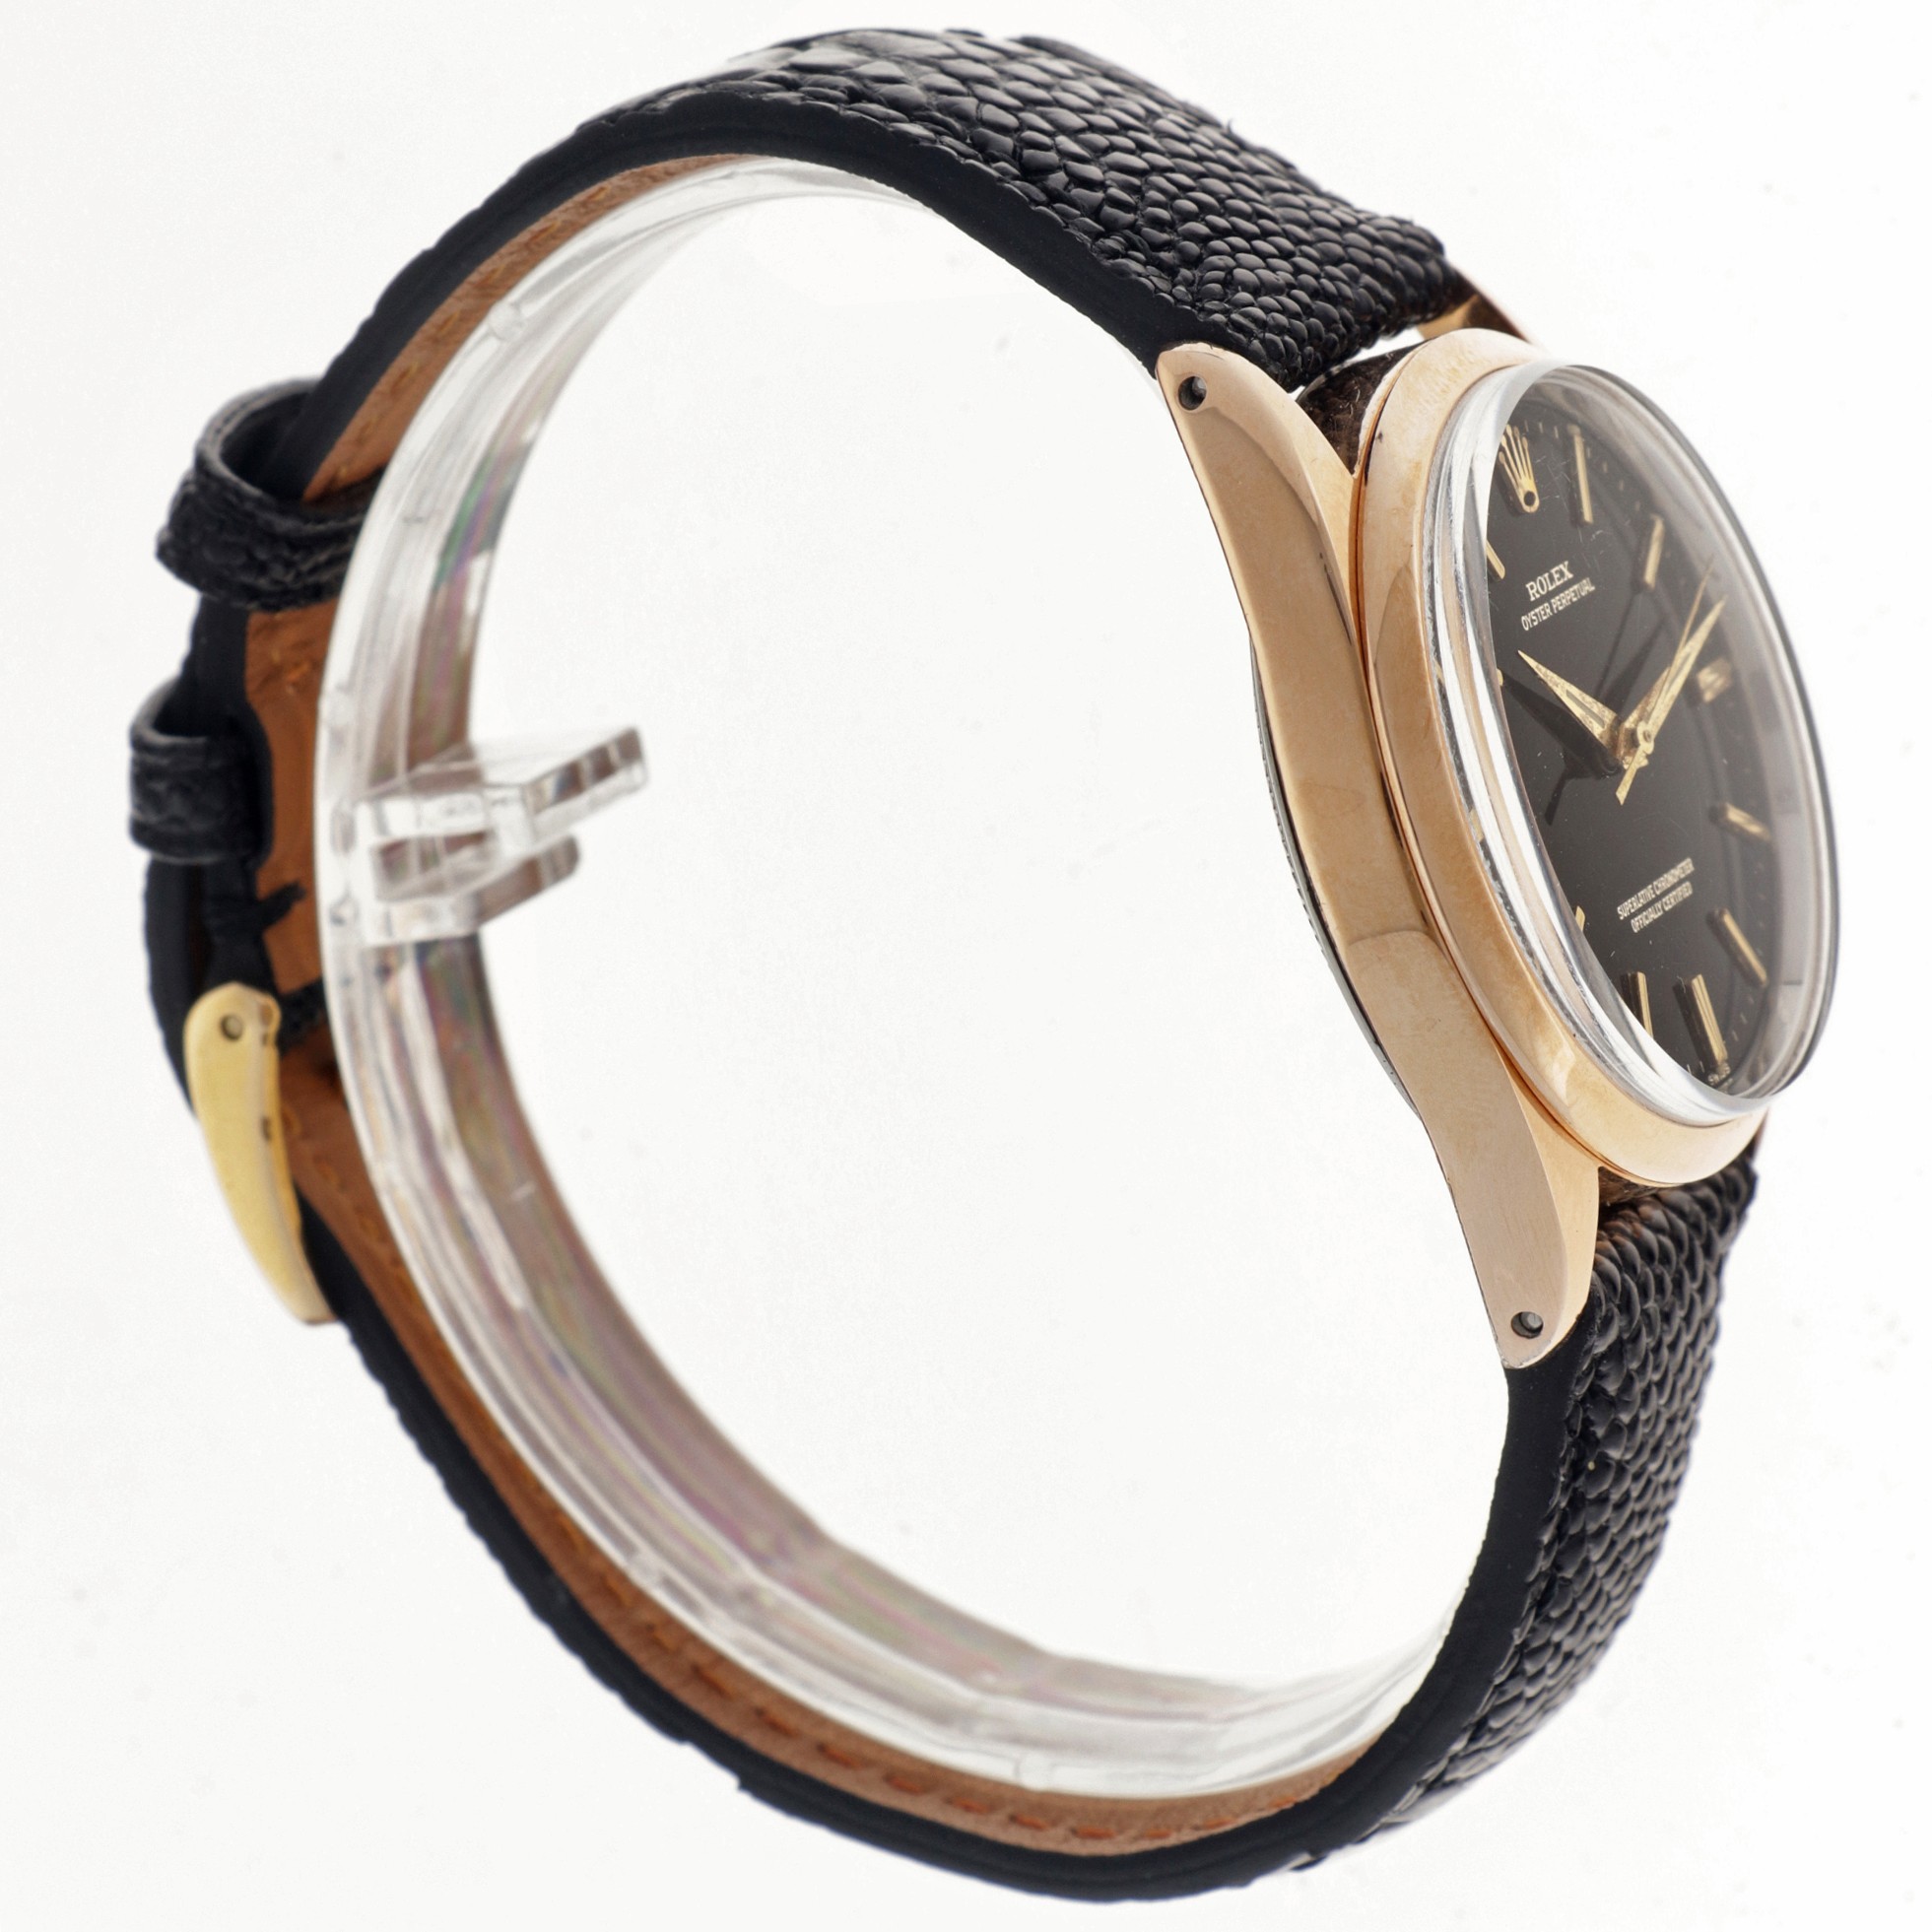 No Reserve - Rolex Oyster Perpetual 1024 - Men's watch - approx. 1961. - Image 4 of 5